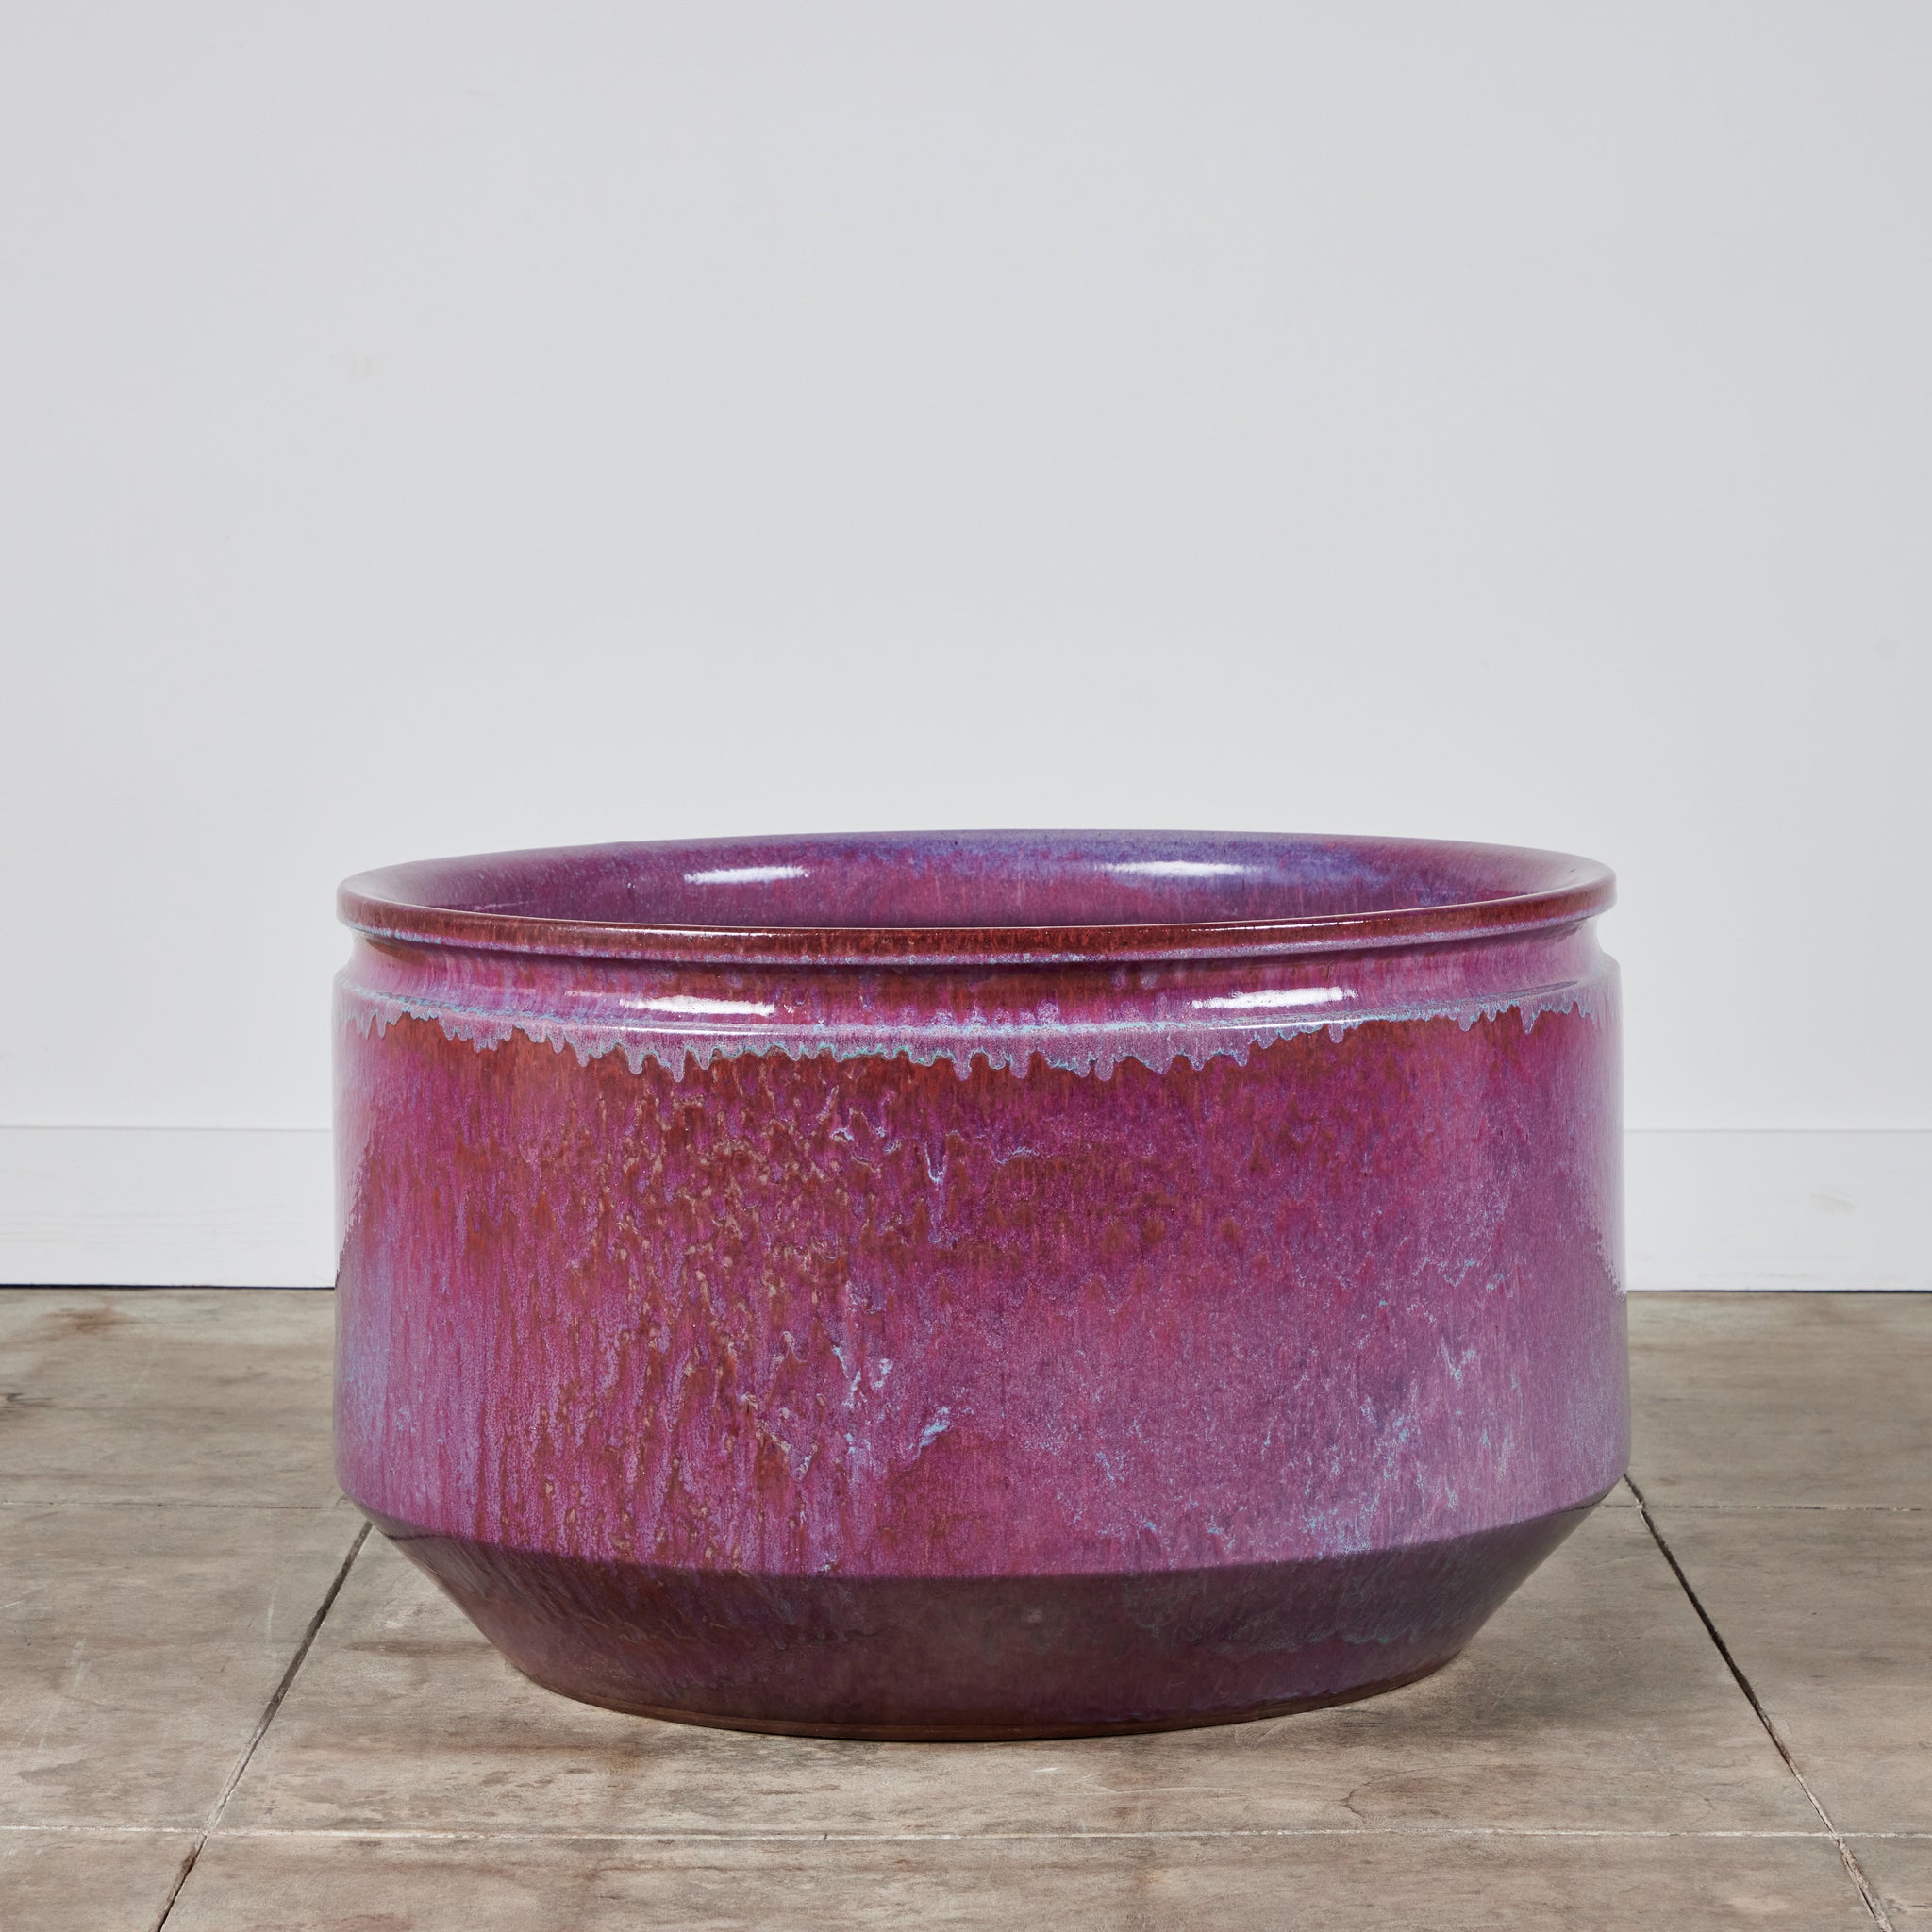 David Cressey and Robert Maxwell Large Ombre Glazed Planter for Earthgender